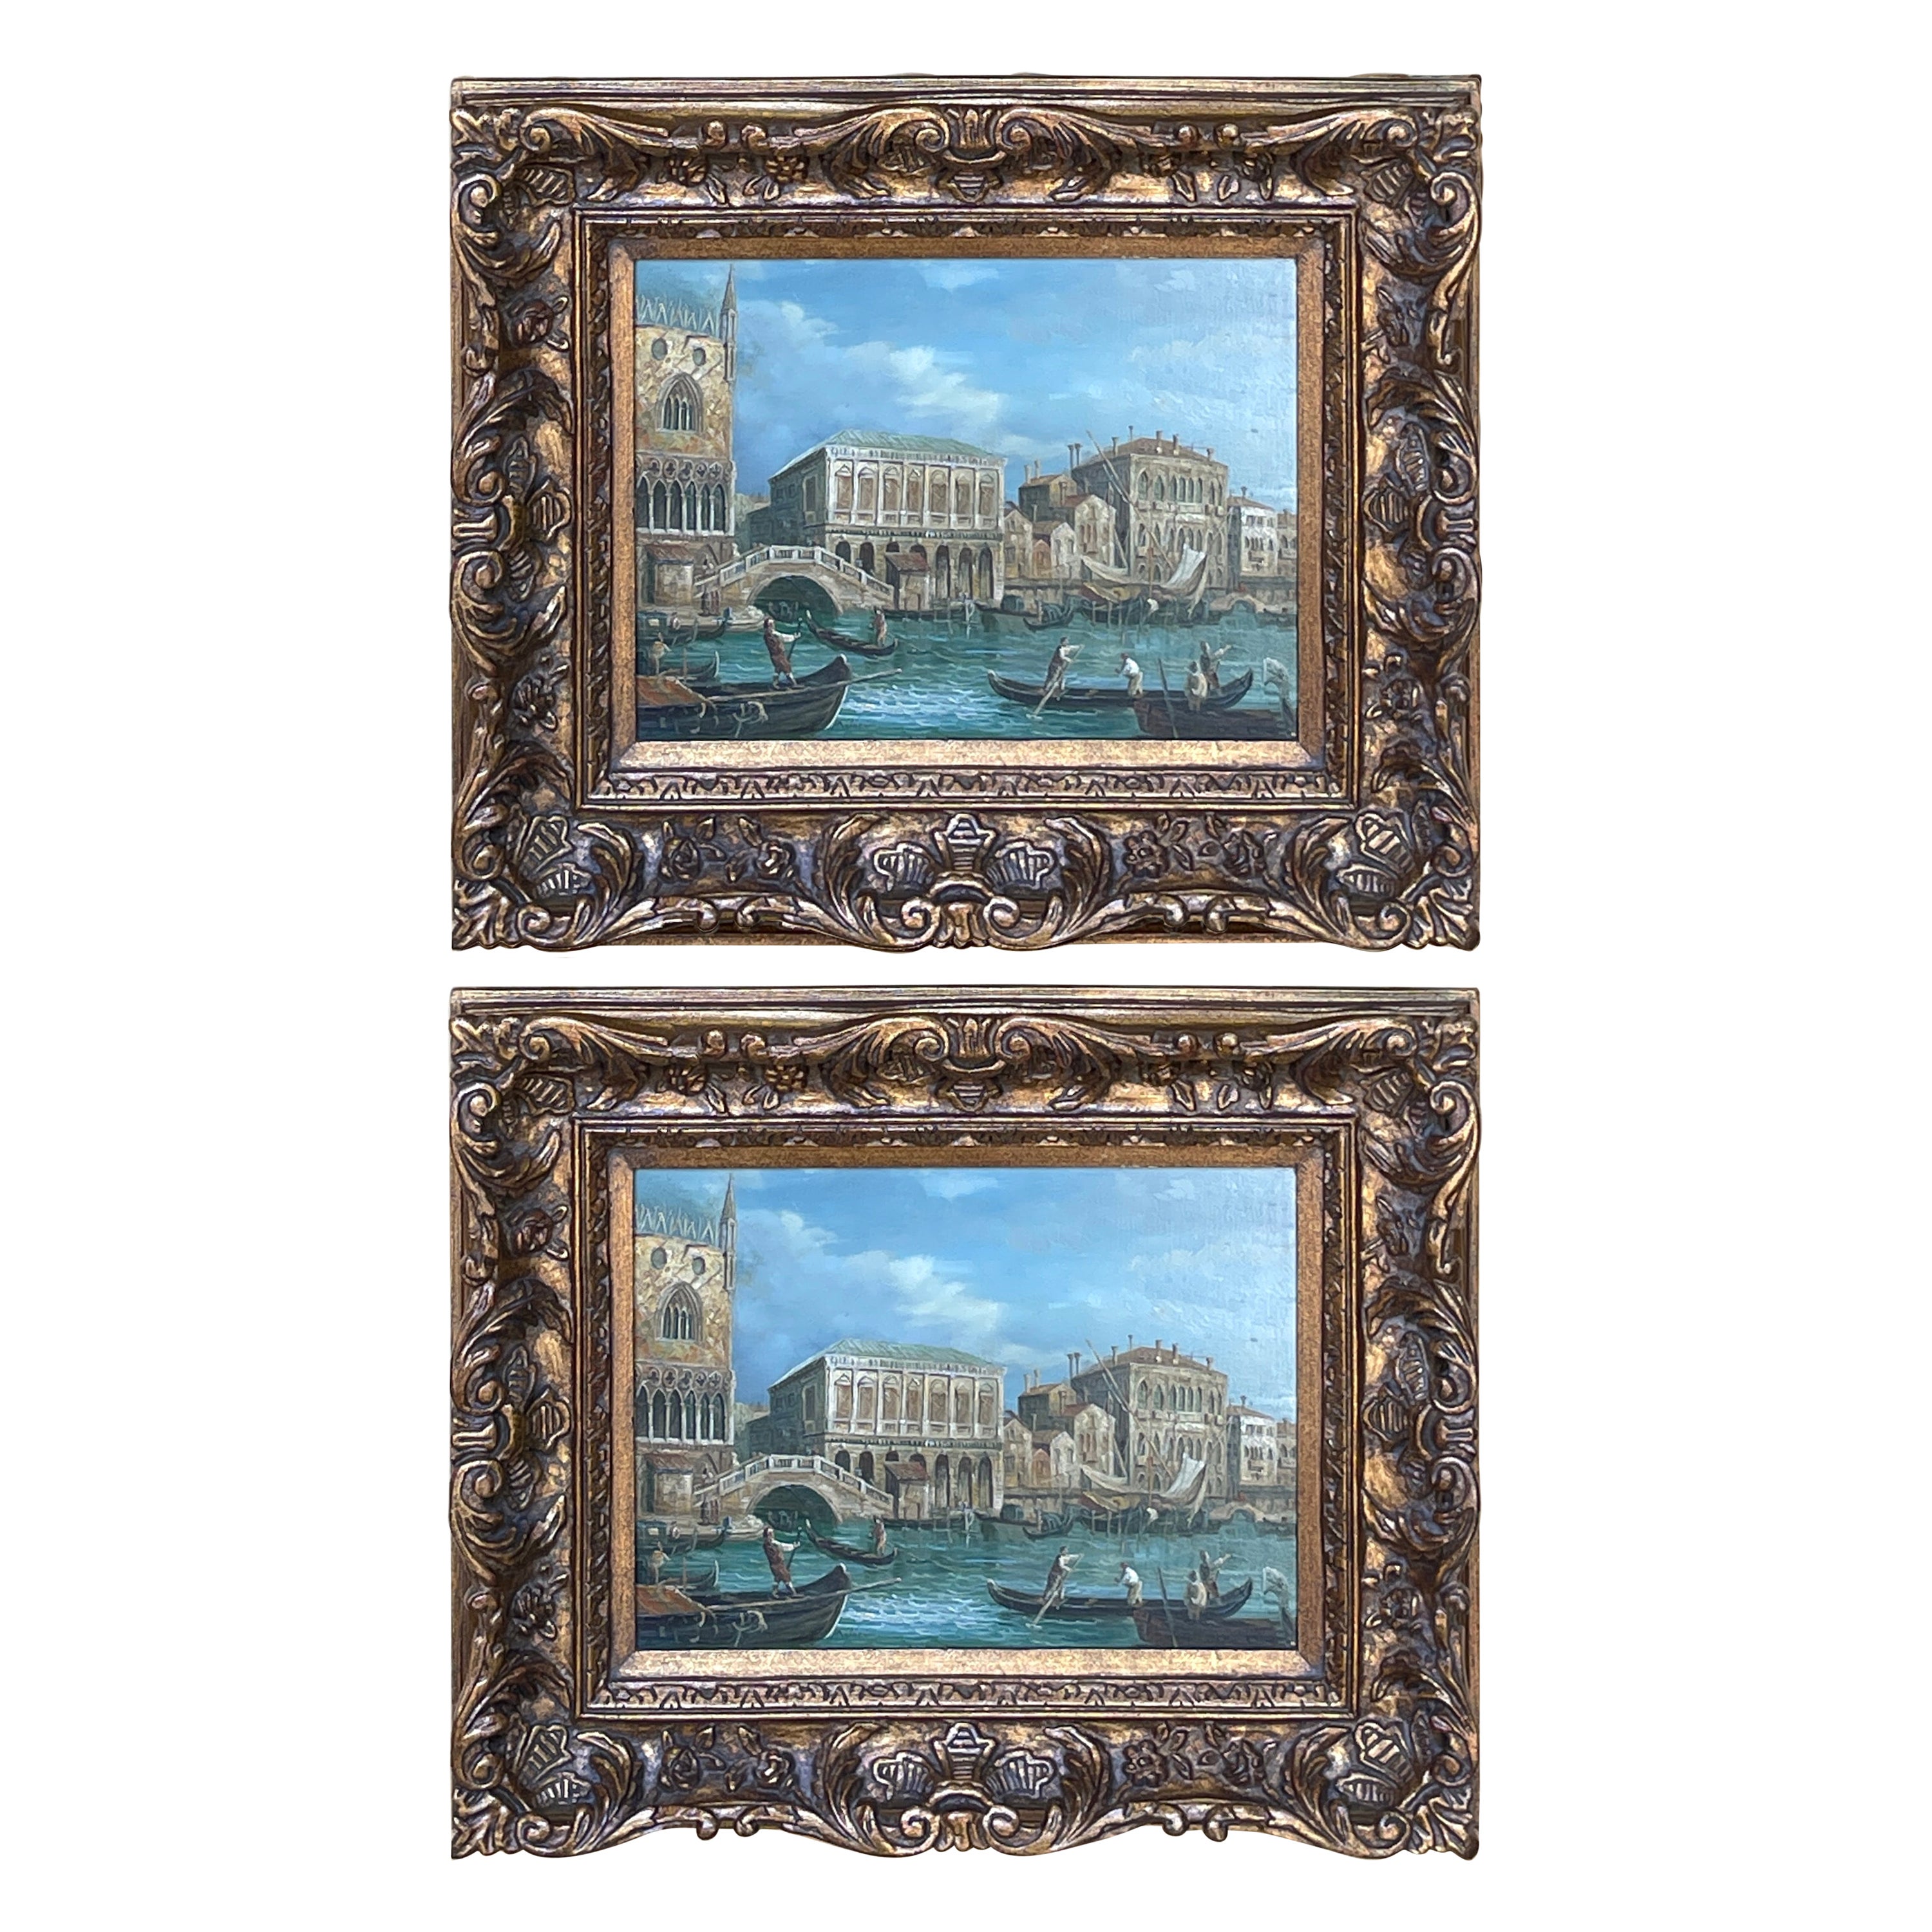 Pair of 20th Century Decorative Venetian Canal Paintings, After Canaletto